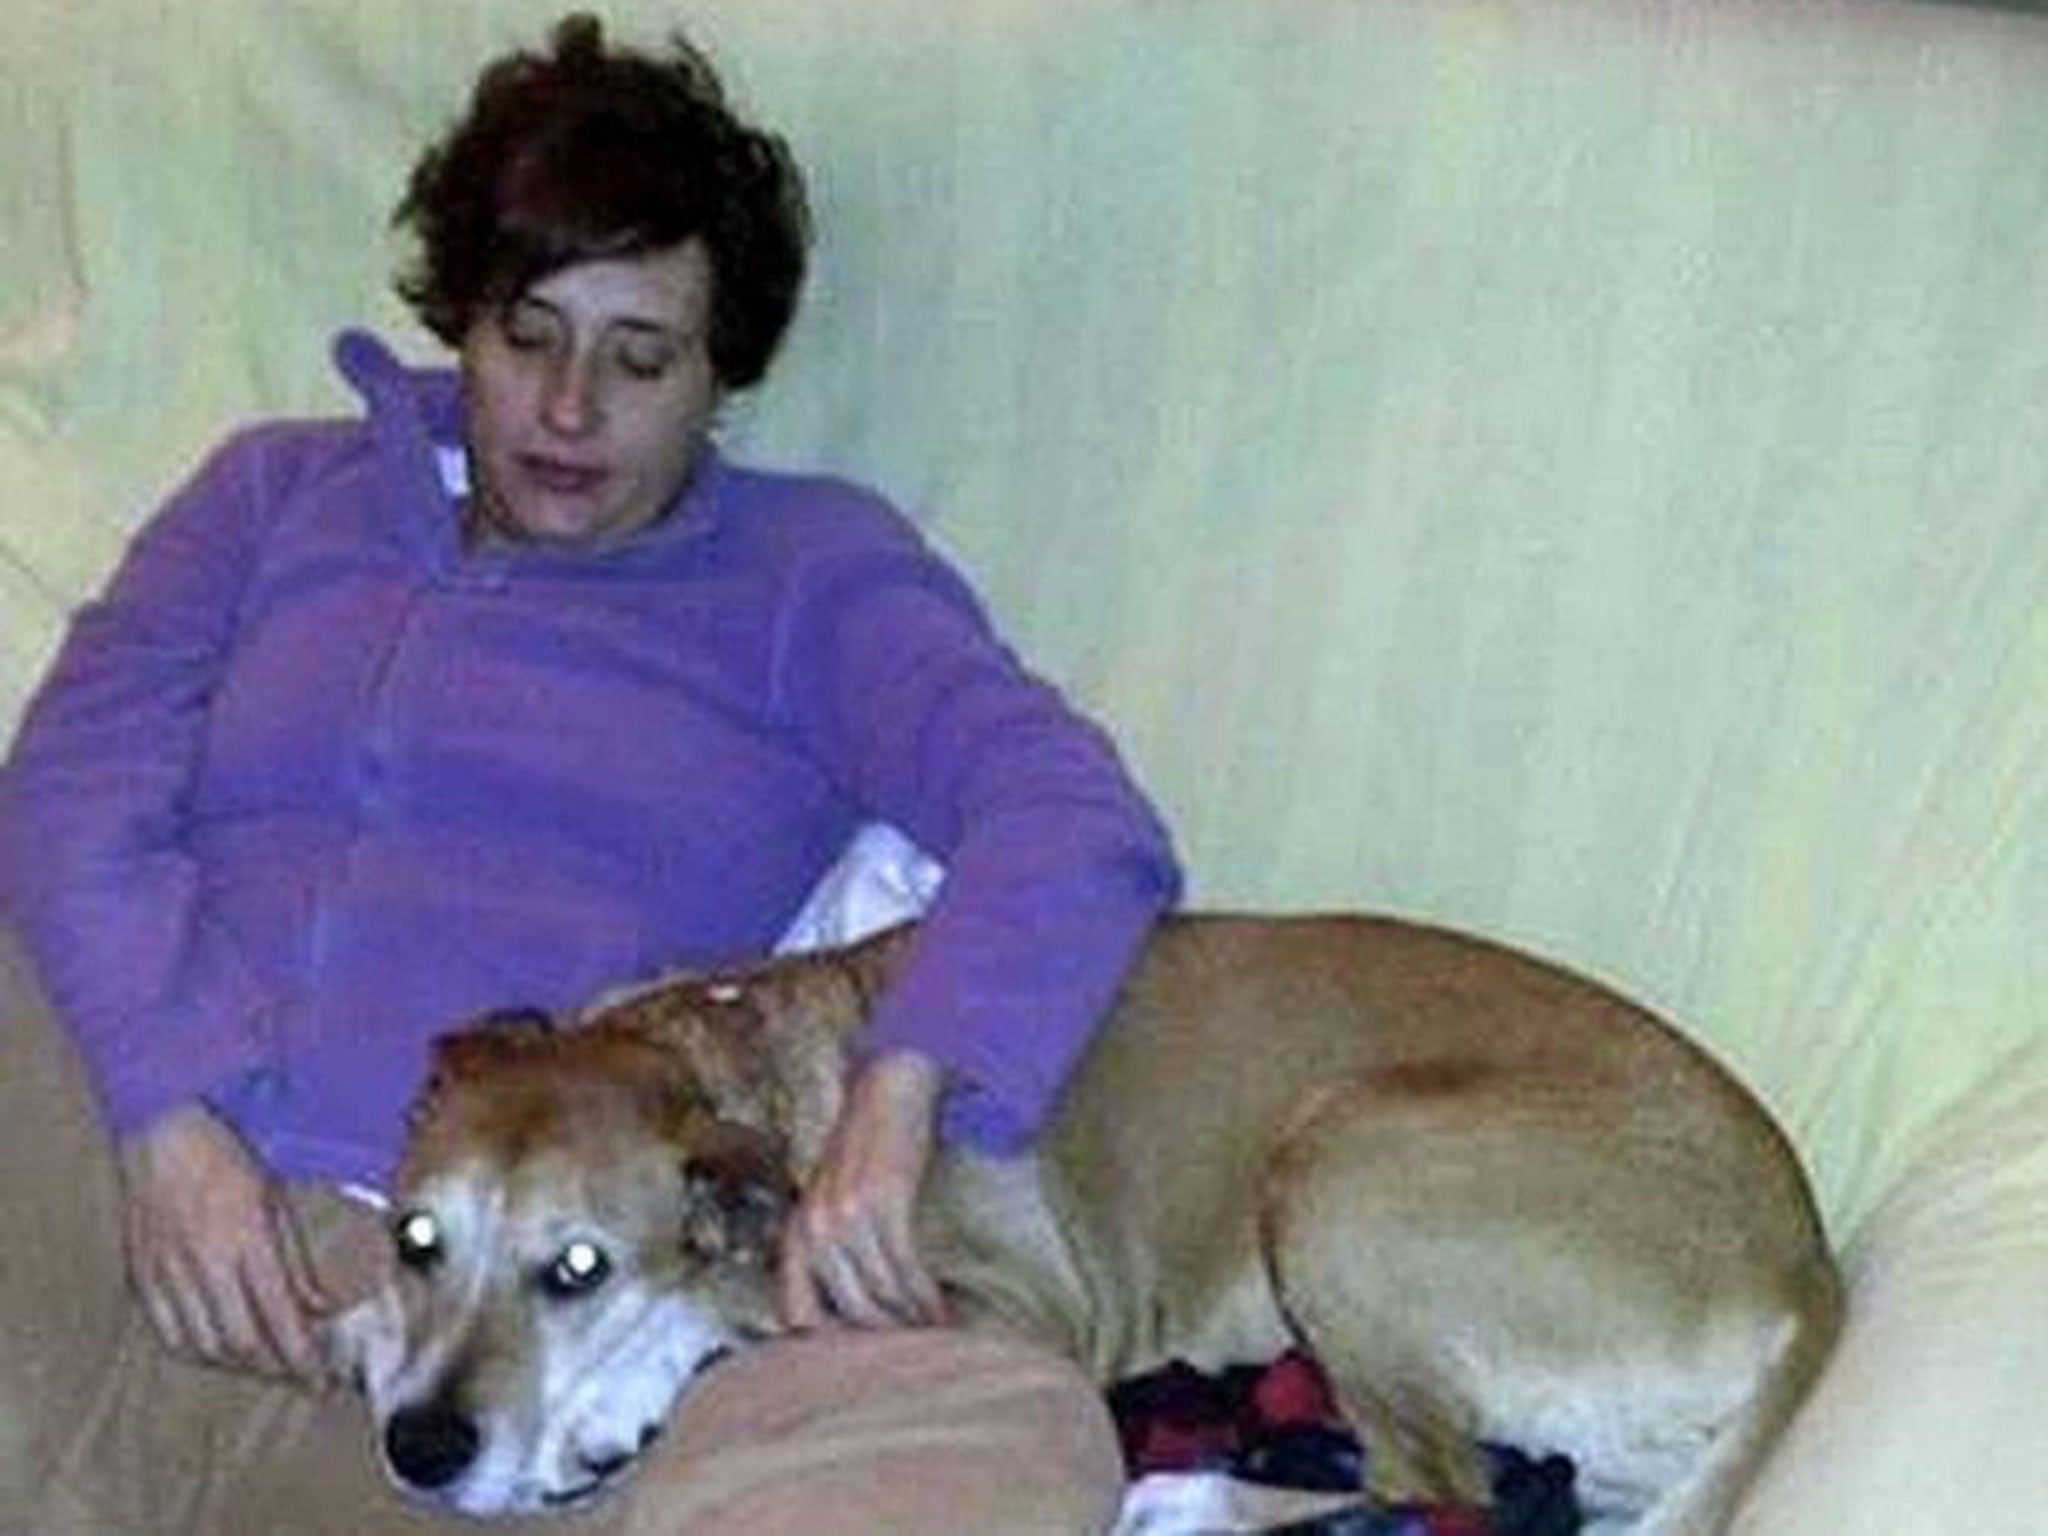 A photograph provided by Animalist Party Against Animal Abuse (PACMA) of Teresa Romero Ramos, the Spanish nurse who became the first person to contract Ebola in Europe